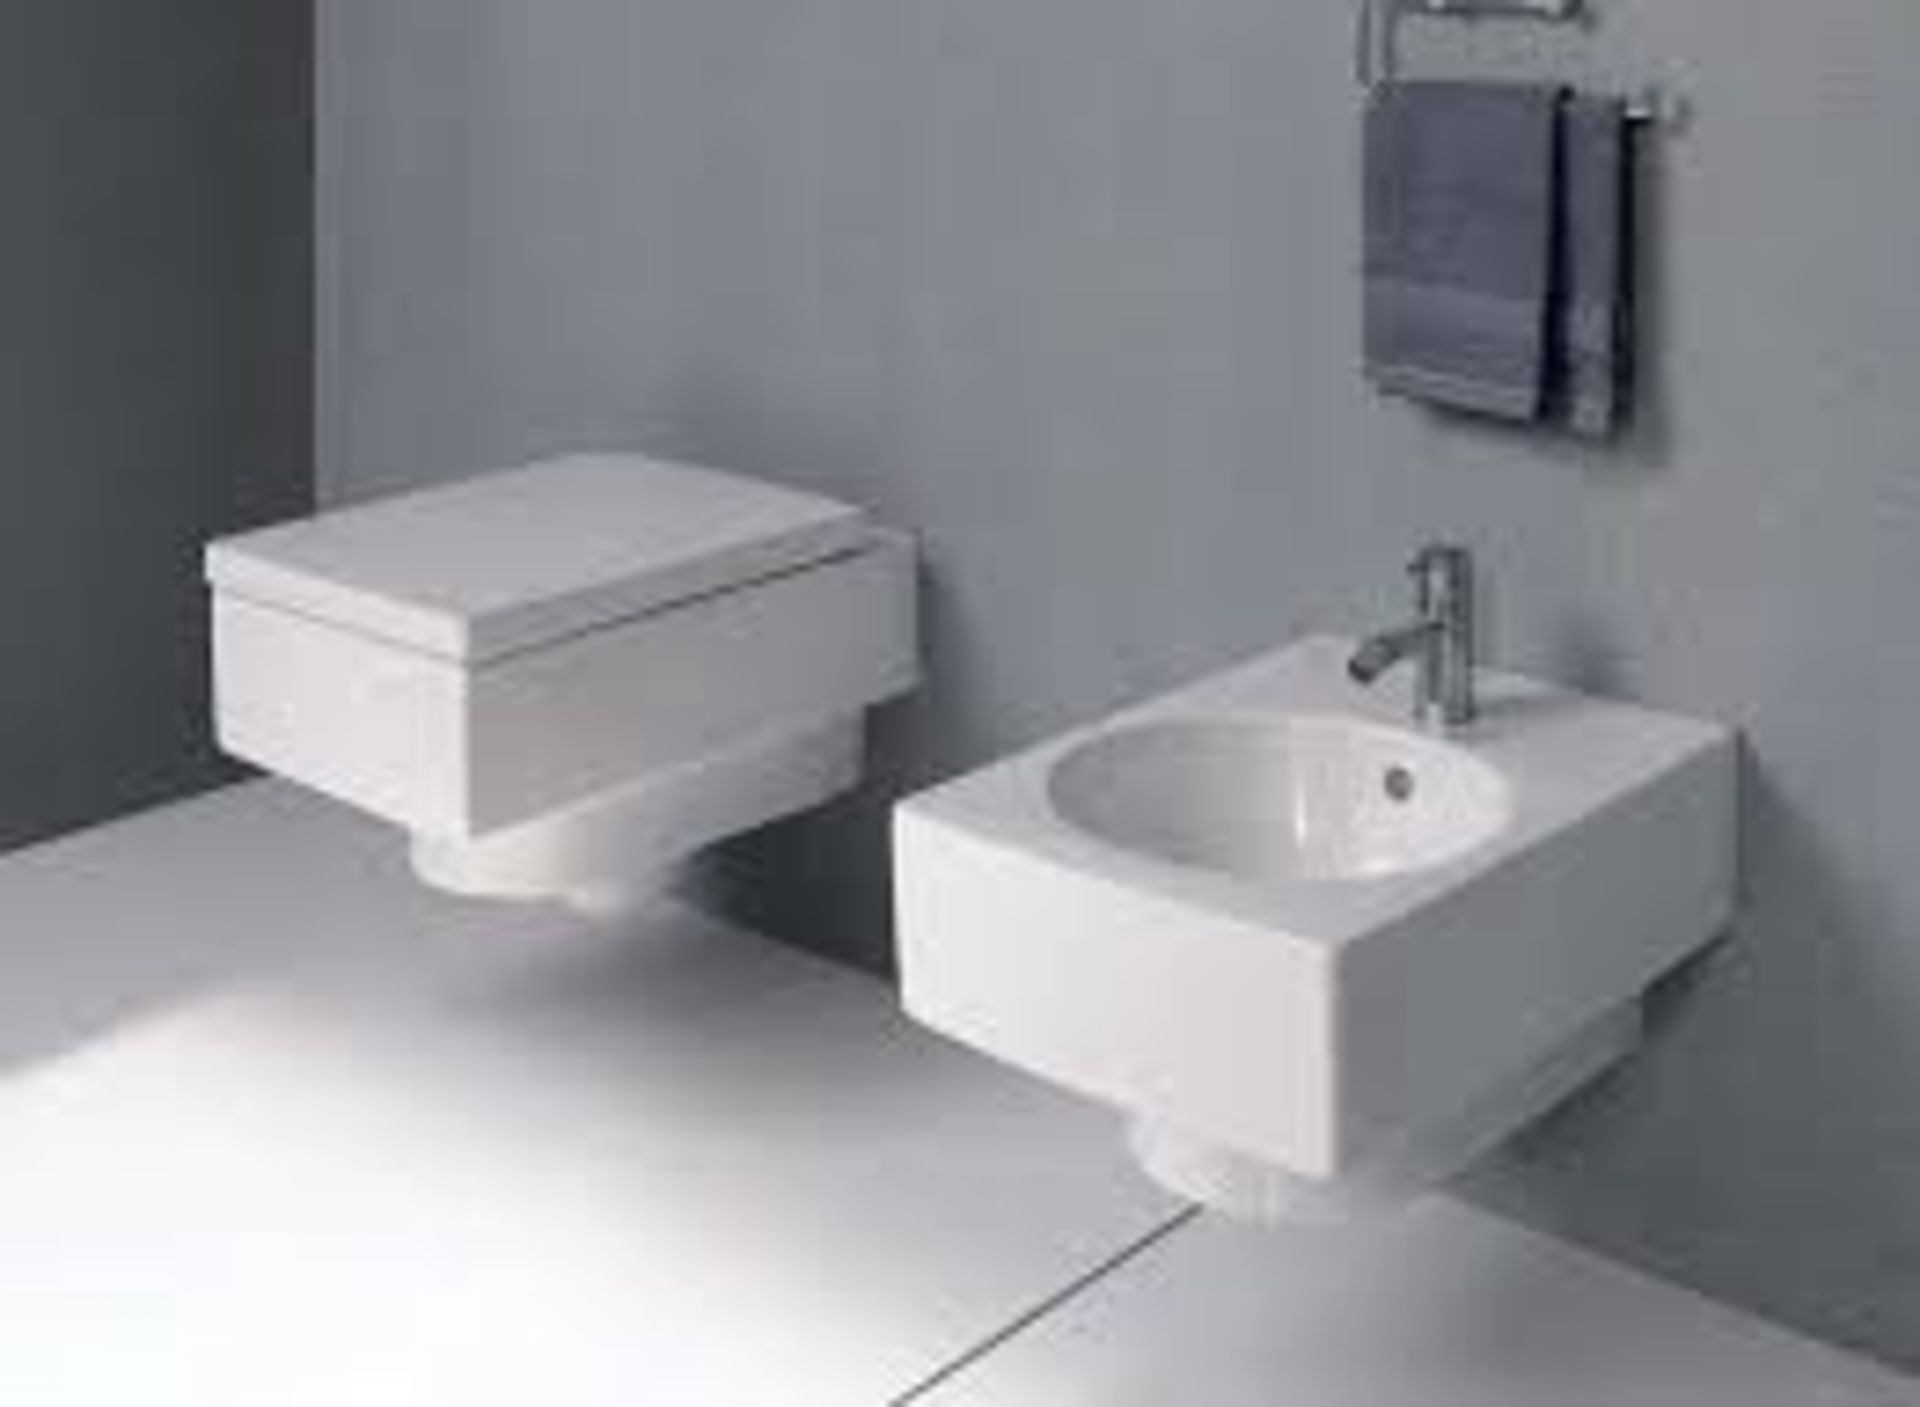 (RR57) Keramag Preciosa - Wash-down WC, 4,5 / 6 l, wall hung Fits effortlessly into even the ...(( - Image 3 of 4